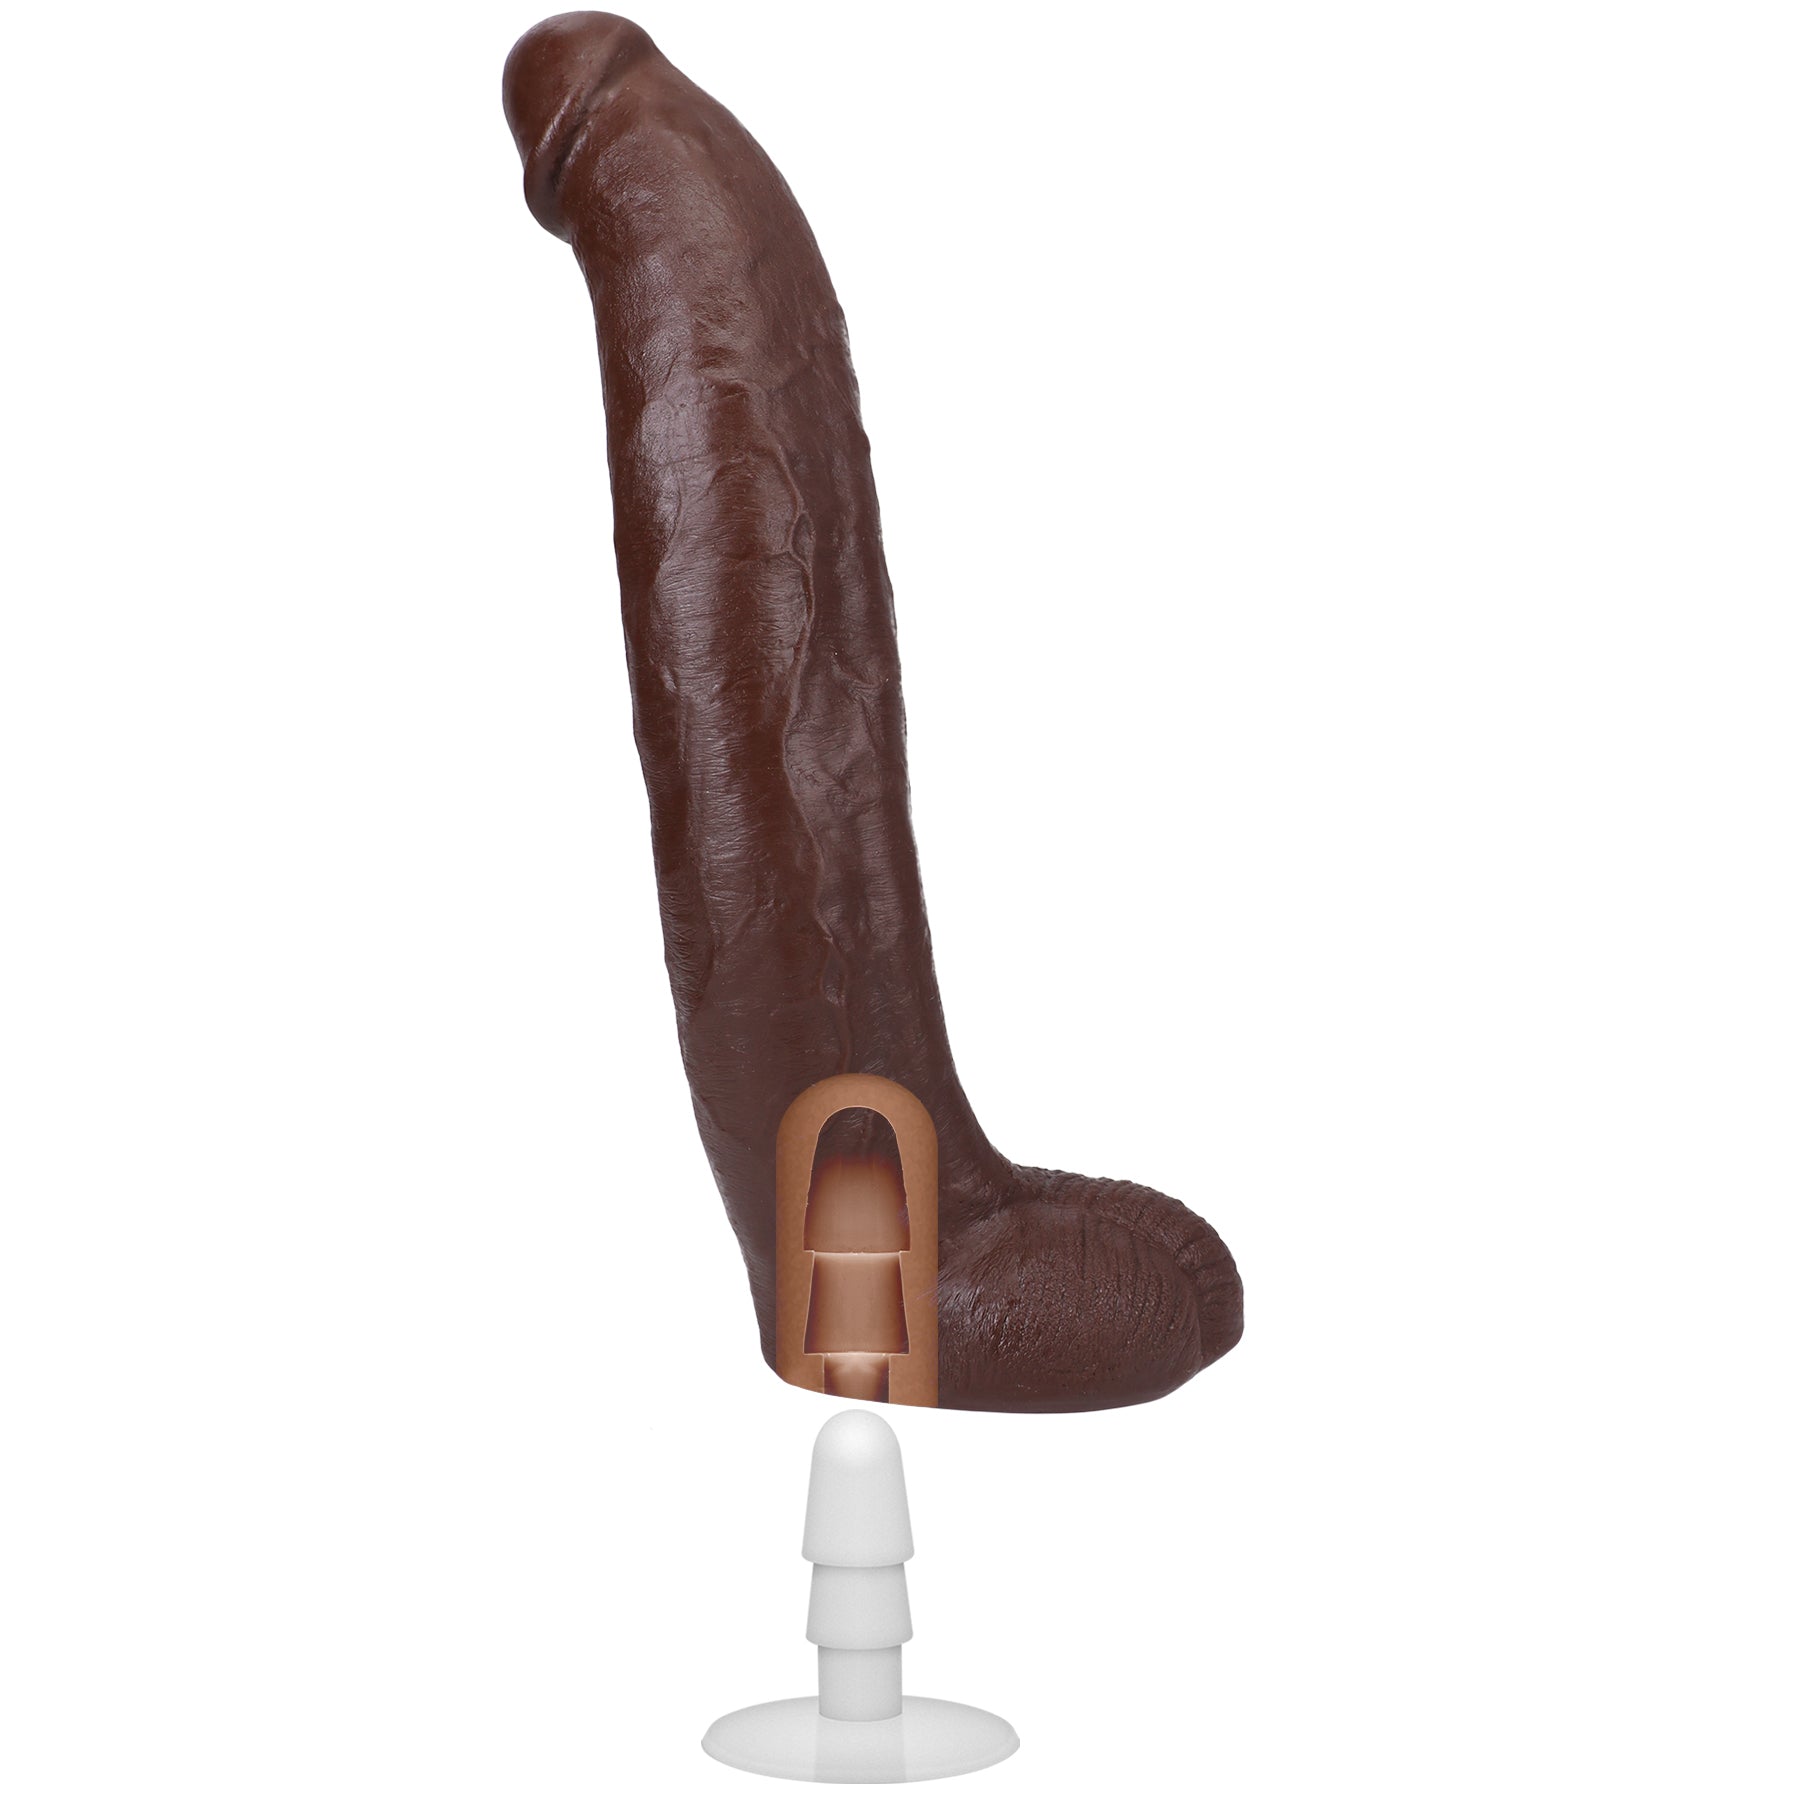 Signature Cocks - Brickzilla - 13 Inch Ultraskyn  Cock With Removable Vac-U-Lock Suction Cup -  Chocolate-0